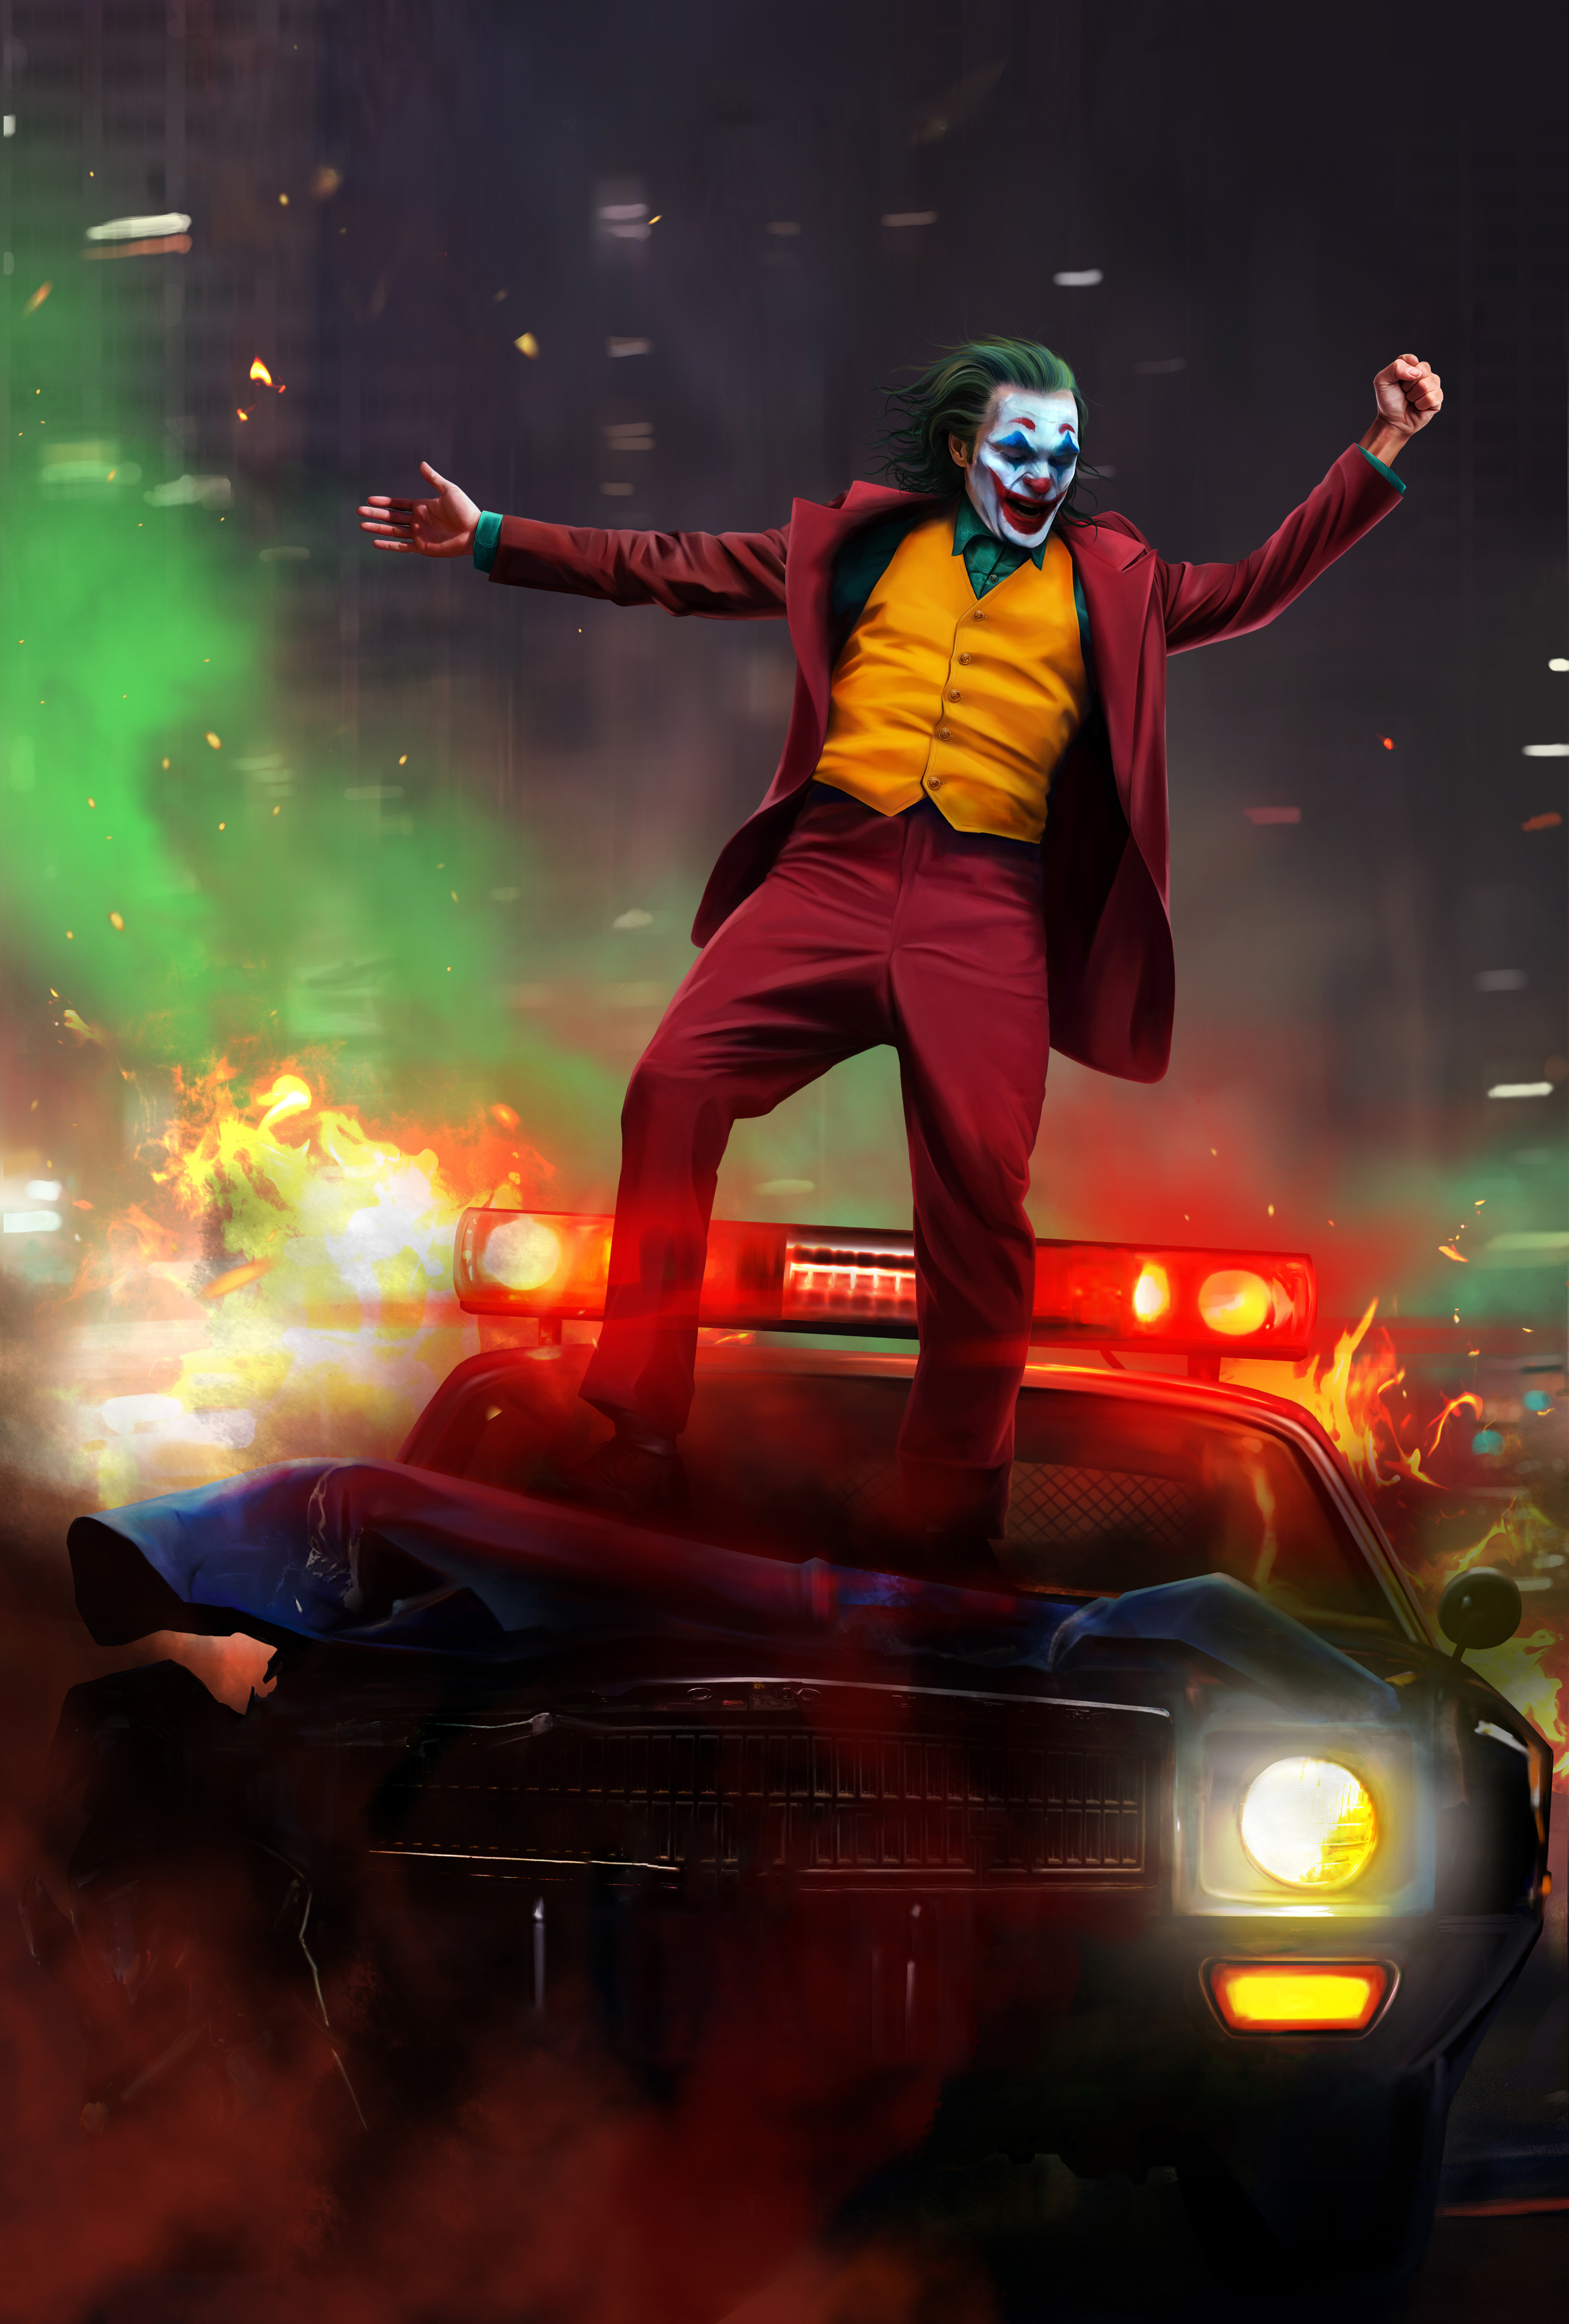 Joker Dark Knight Themes HD Wallpapers 3D icons Apk Download for Android-  Latest version - com.live.wallpaper.free.background.phone.launcher.theme. joker.dark.knight